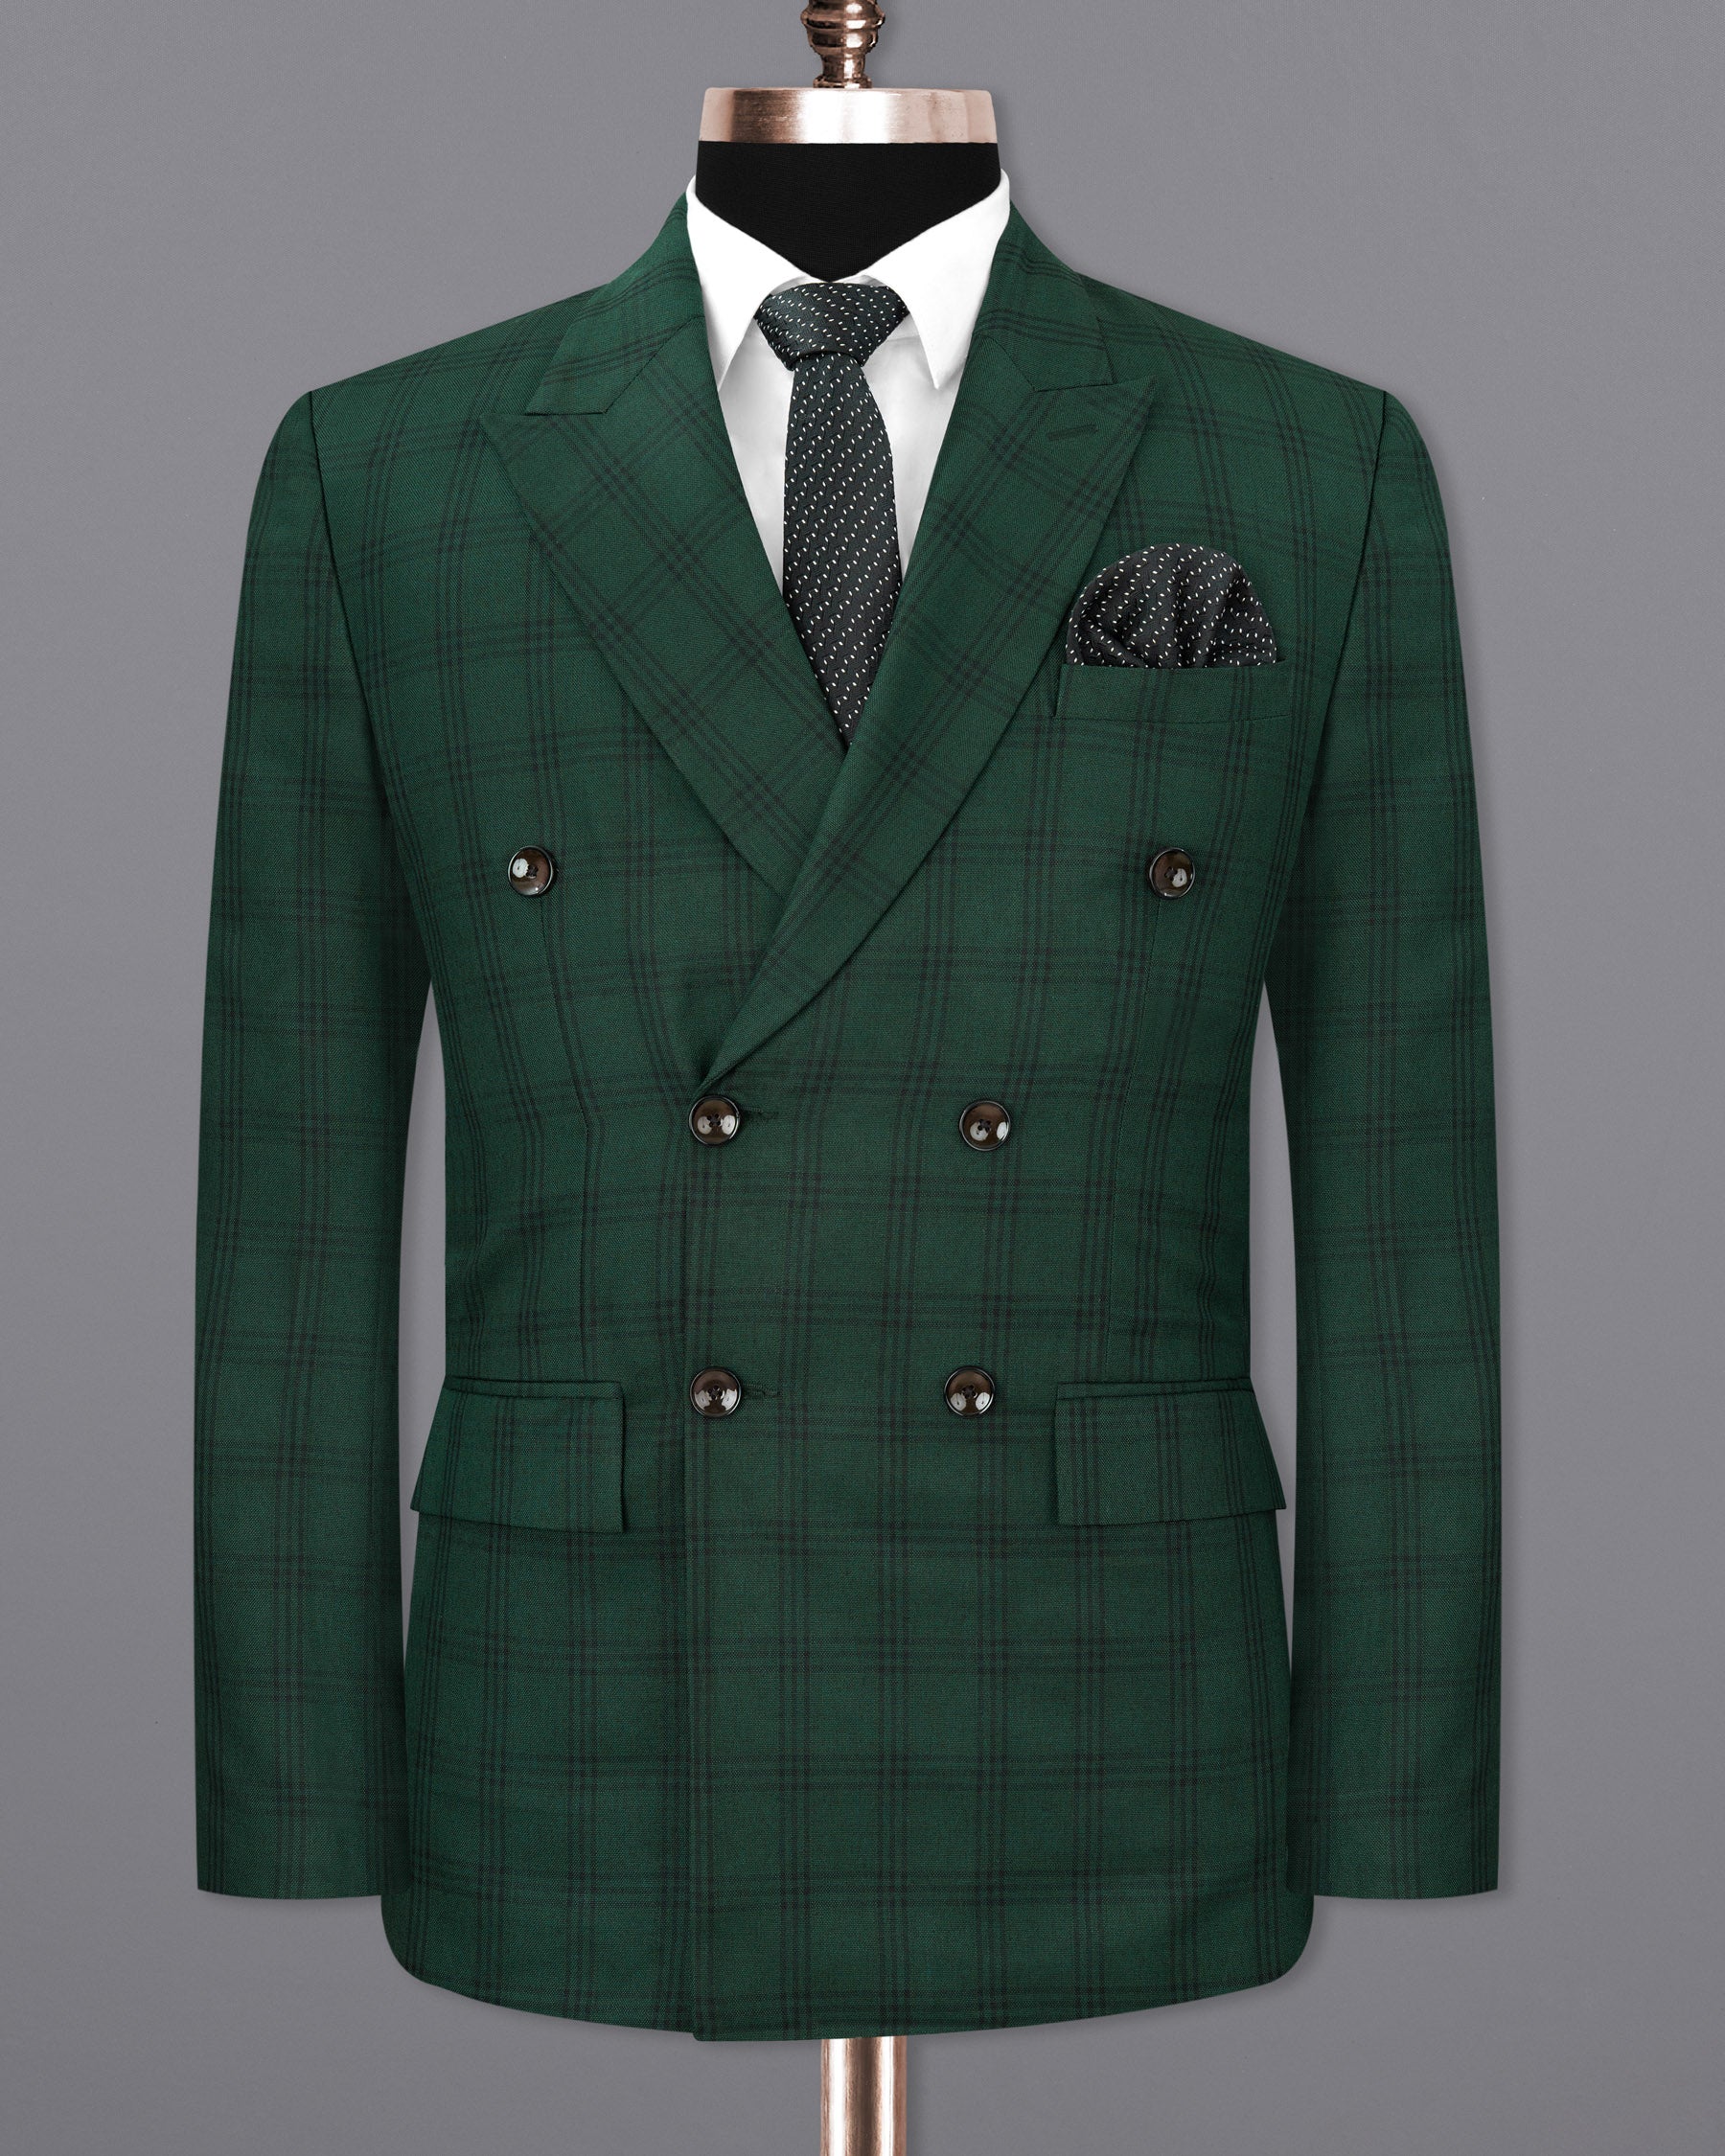 Phthalo Green Windowpane Double Breasted Suit ST1722-DB-36, ST1722-DB-38, ST1722-DB-40, ST1722-DB-42, ST1722-DB-44, ST1722-DB-46, ST1722-DB-48, ST1722-DB-50, ST1722-DB-52, ST1722-DB-54, ST1722-DB-56, ST1722-DB-58, ST1722-DB-60